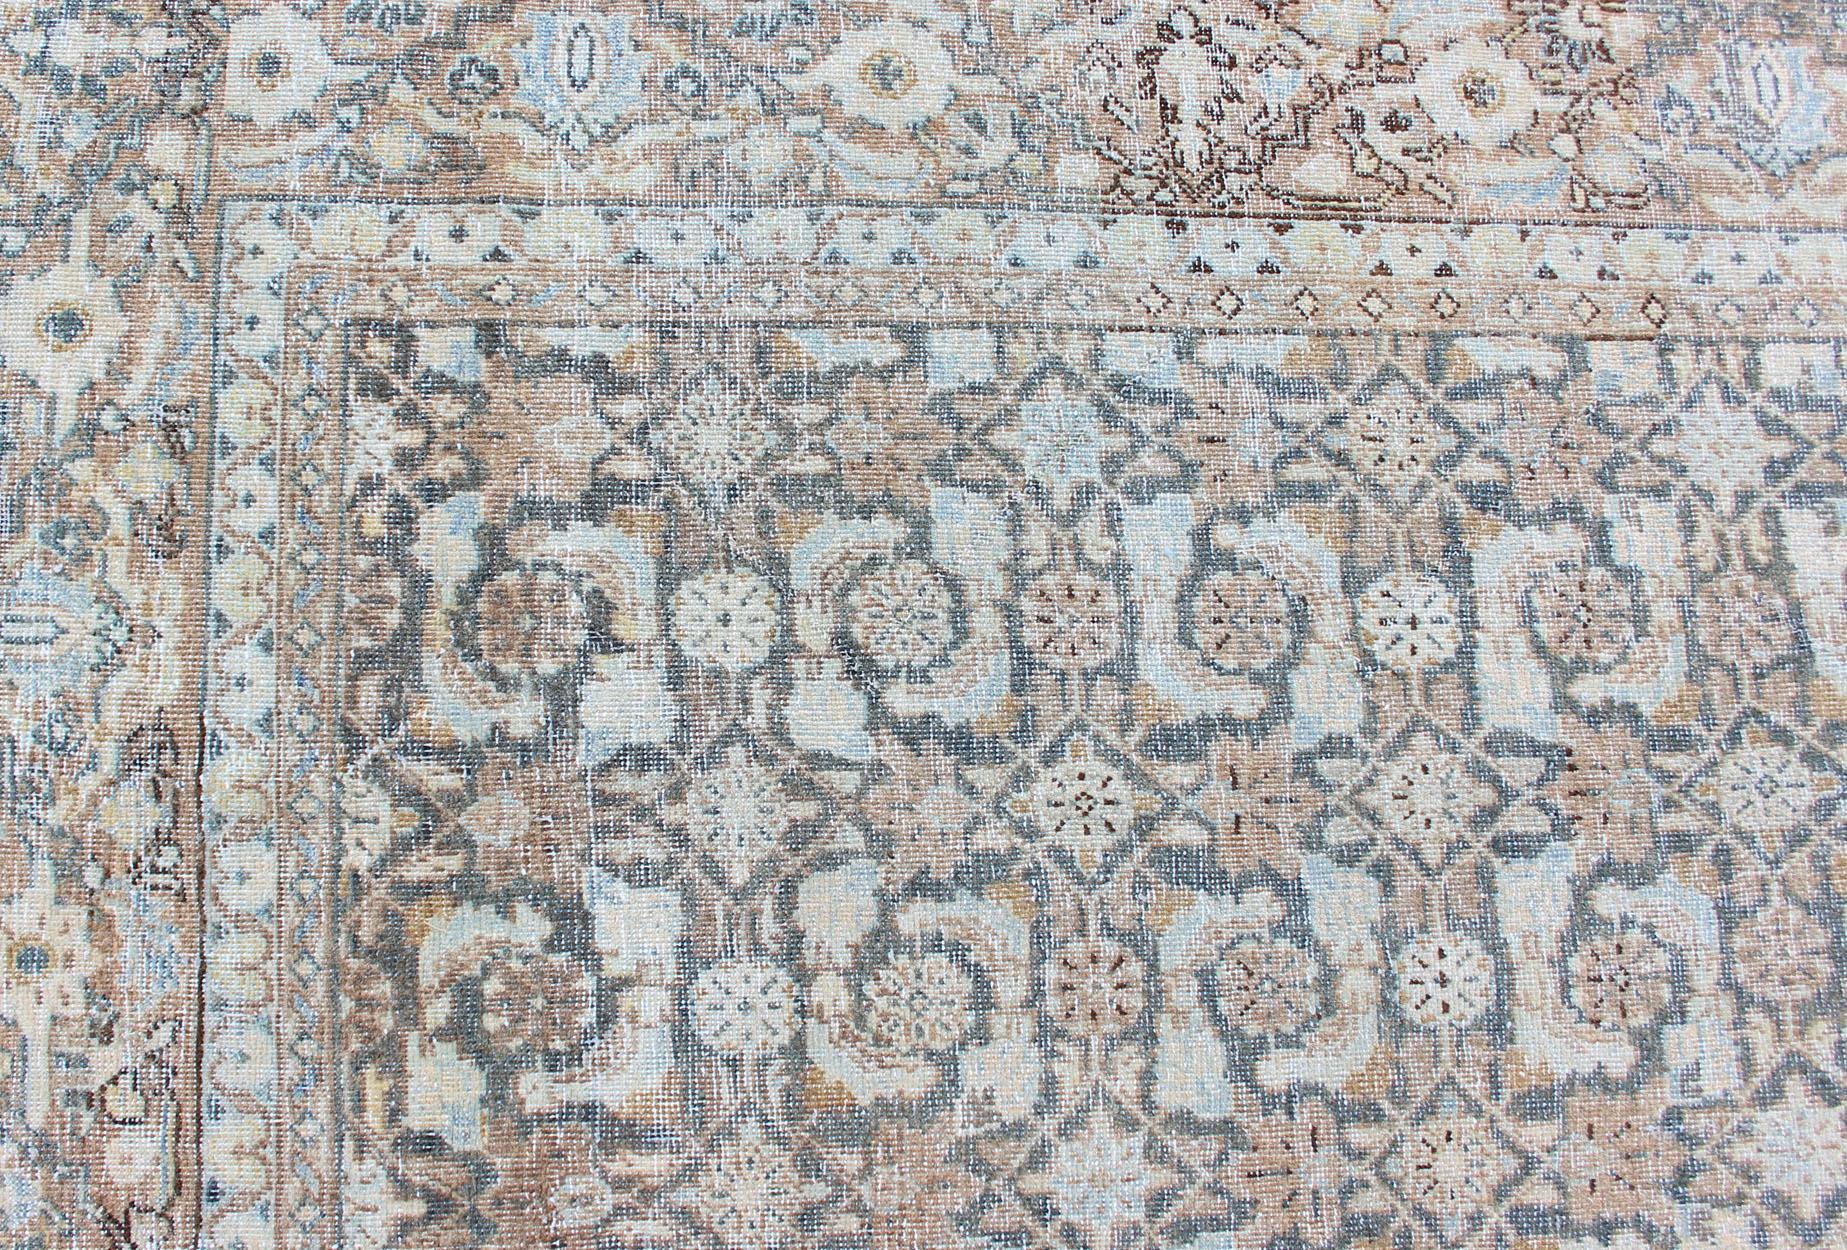 Antique Persian Sultanabad Distressed Rug in Blue, Blue Gray and Light Brown 8